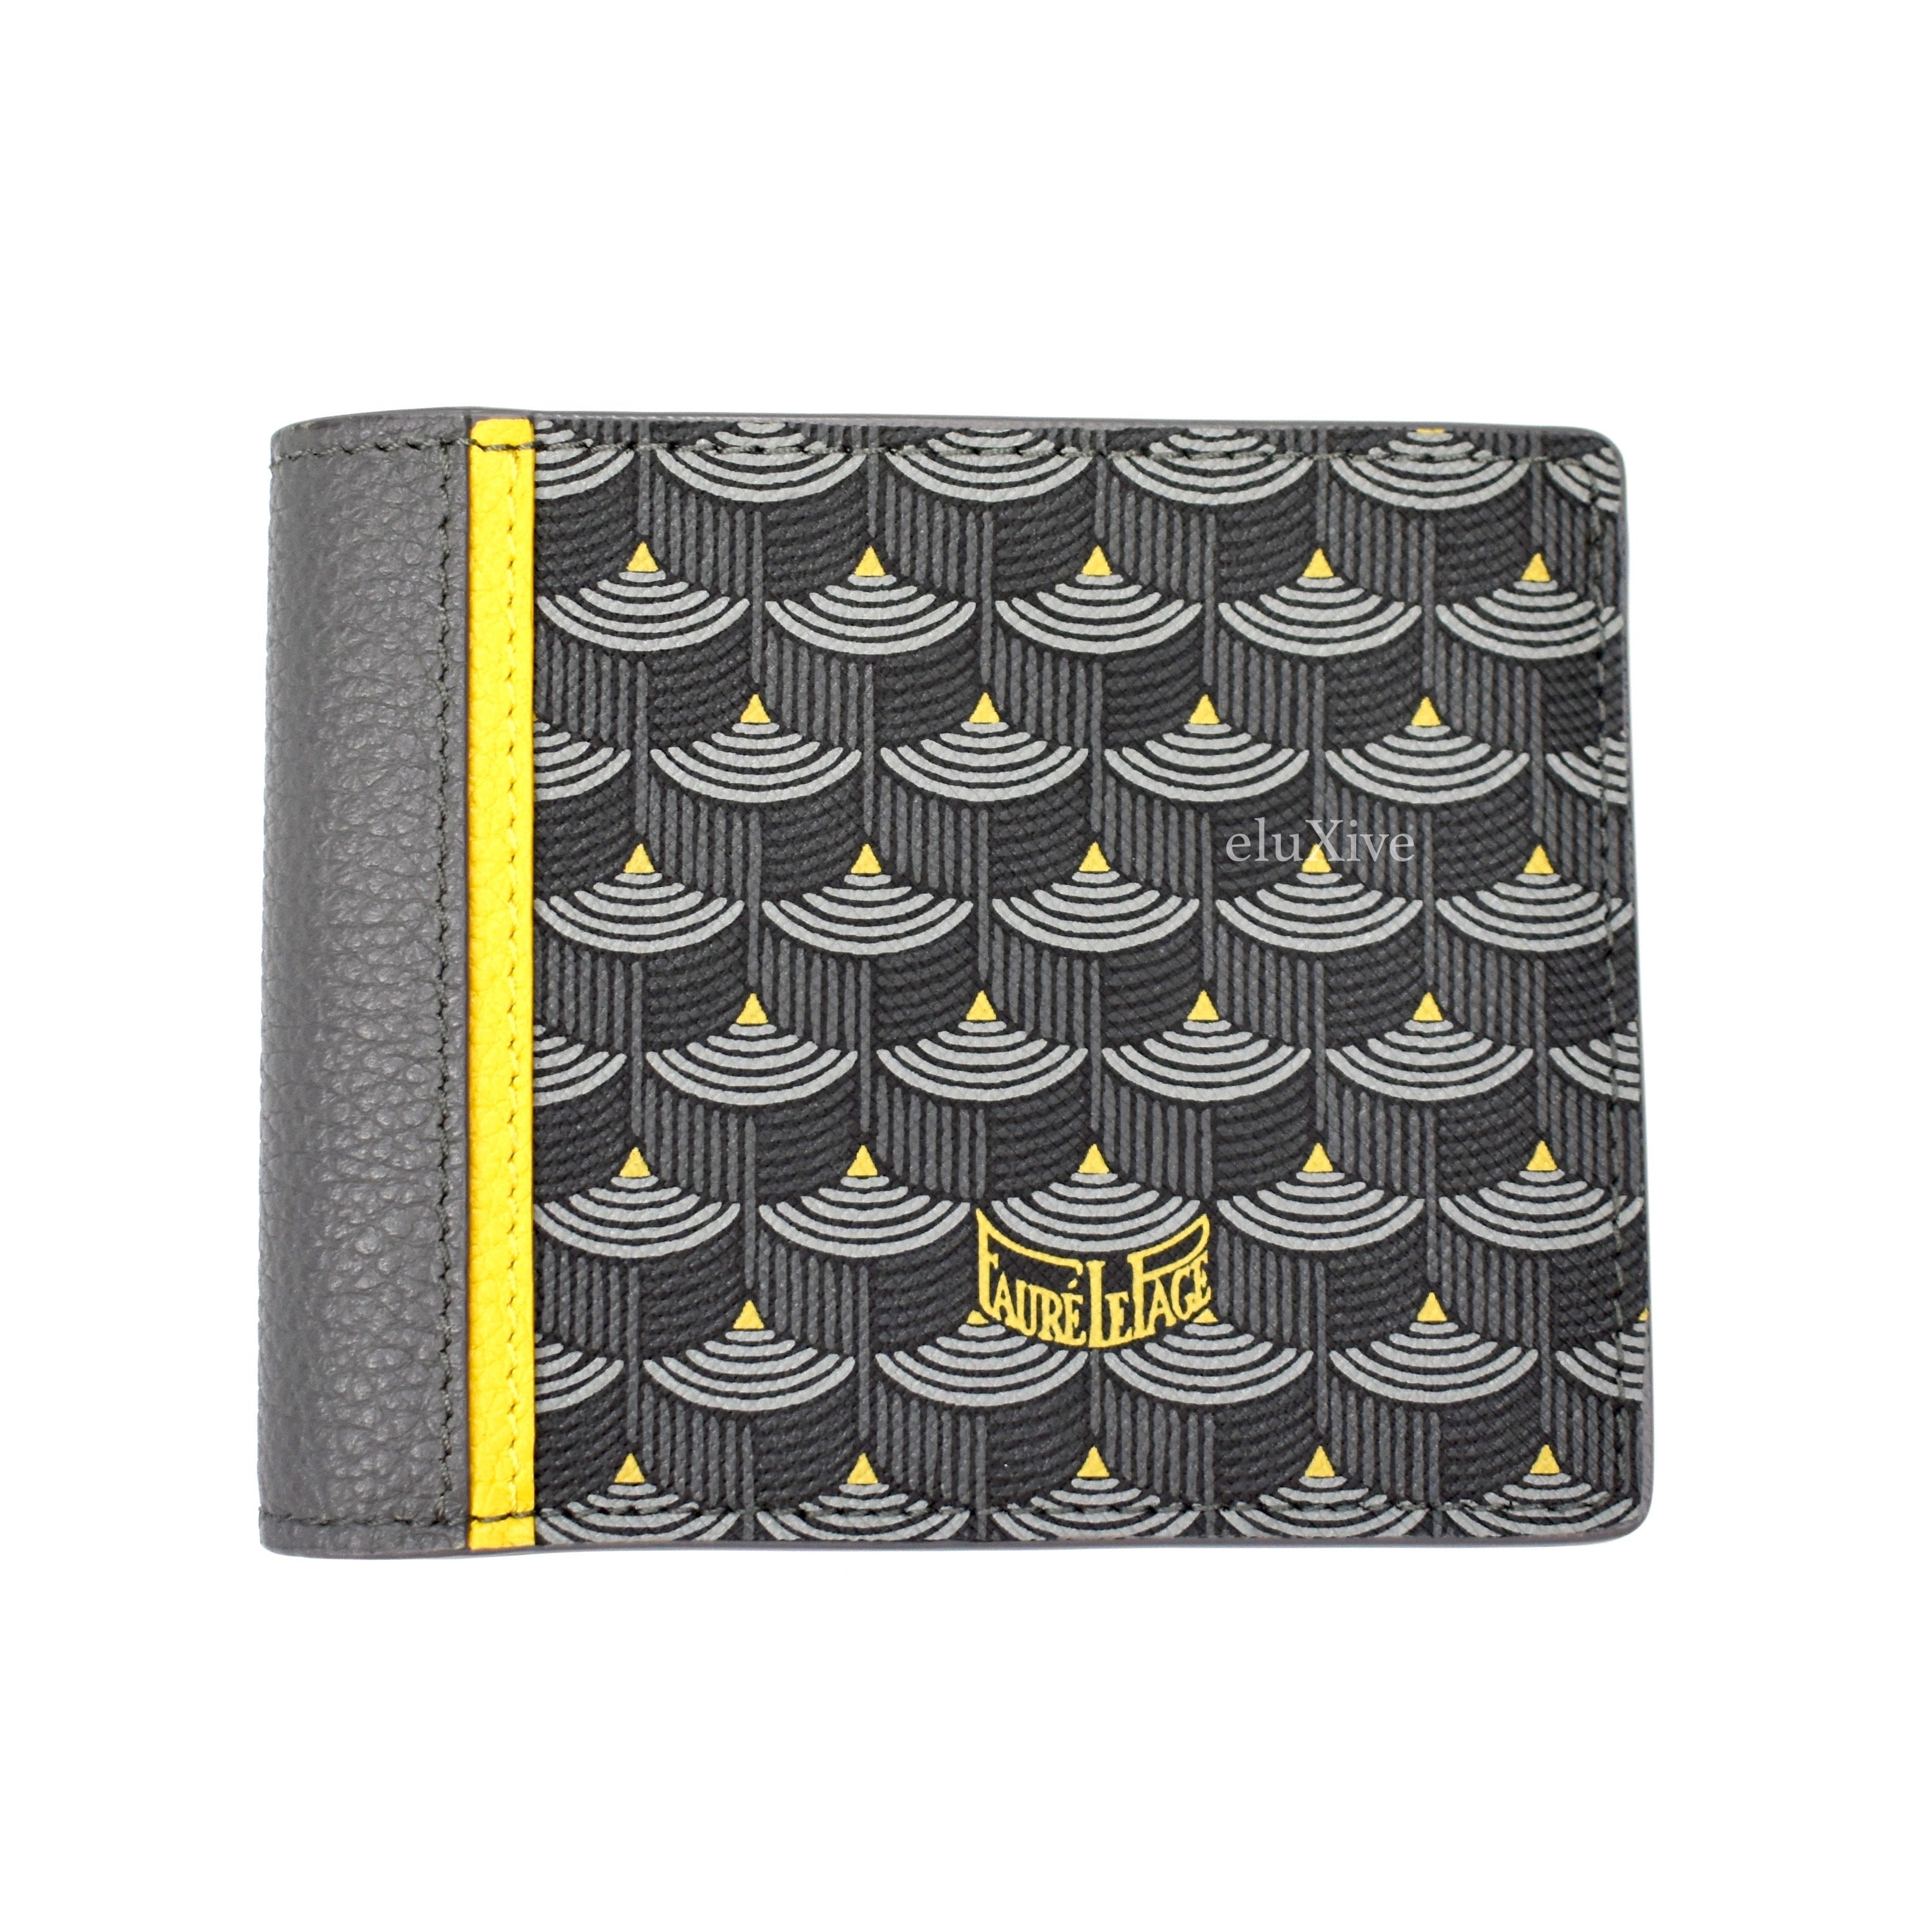 Faure Le Page Steel Gray / Yellow 6CC Bifold Wallet – eluXive